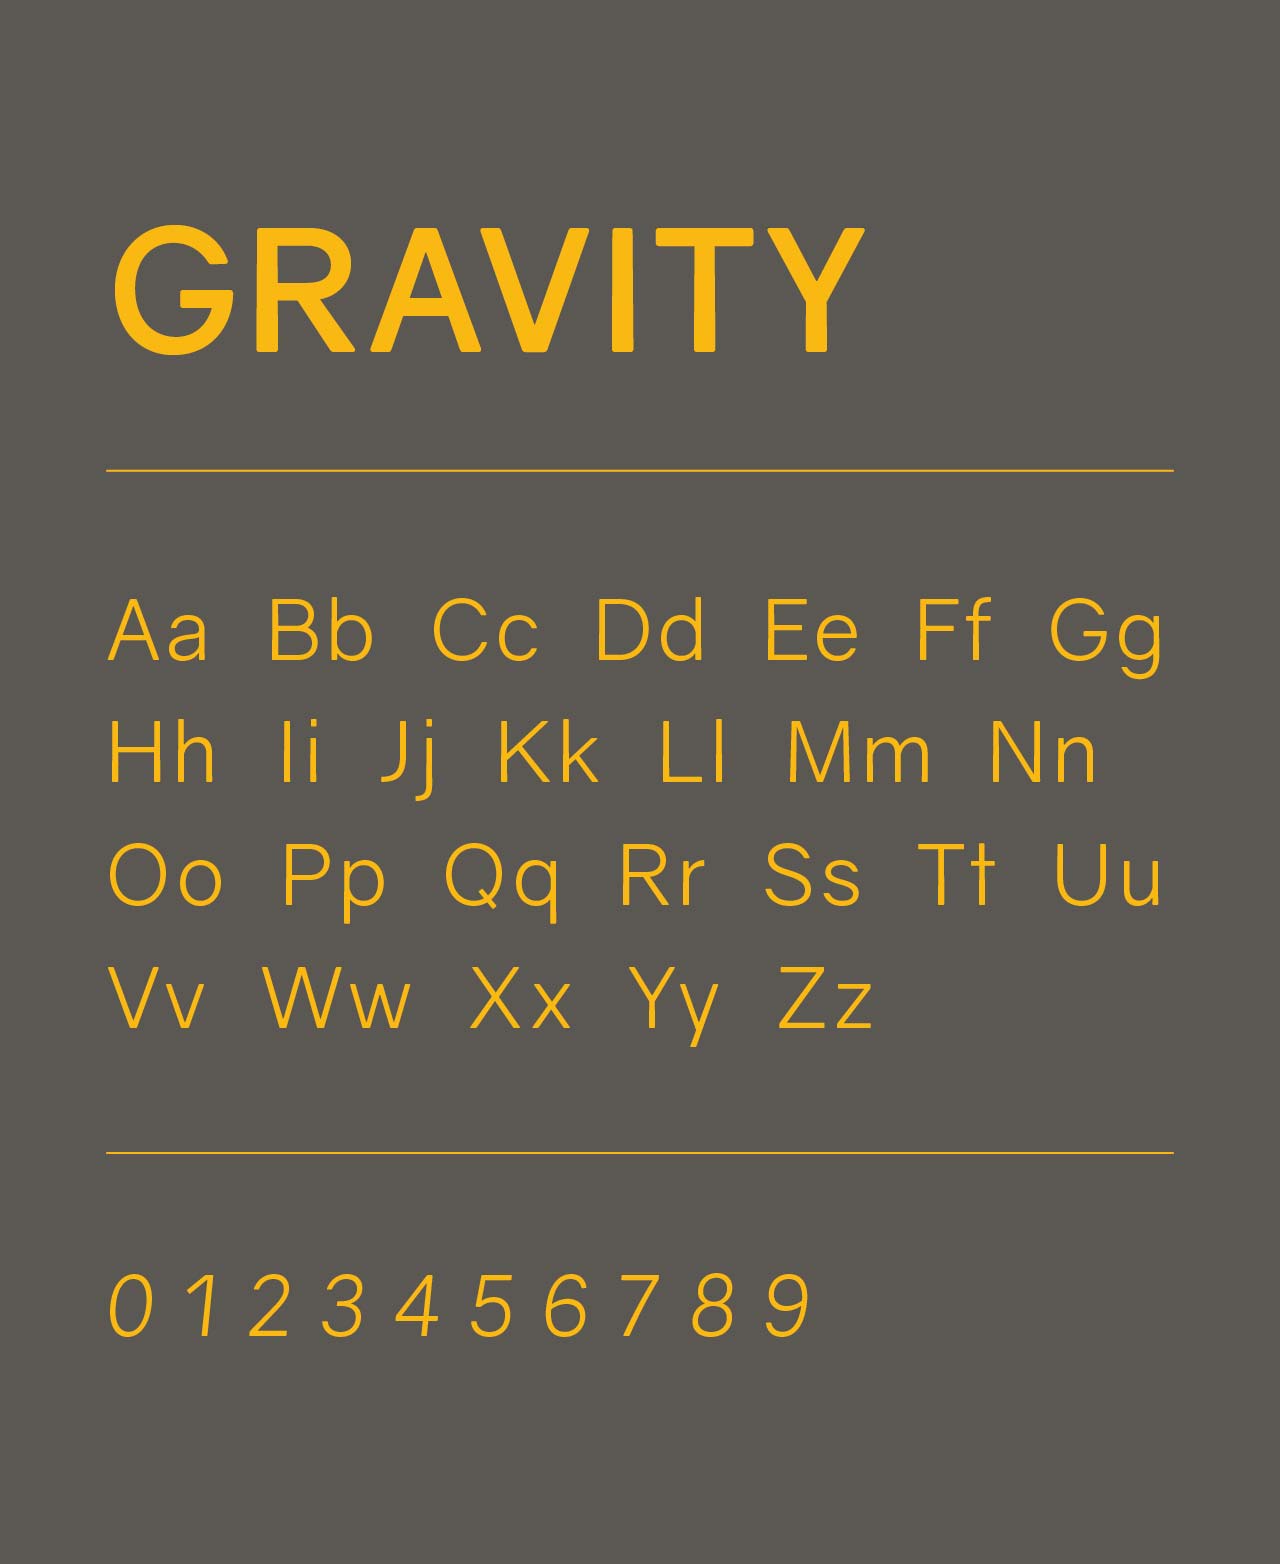 Gravity is the primary typeface used in the Dream Floors brand identity.